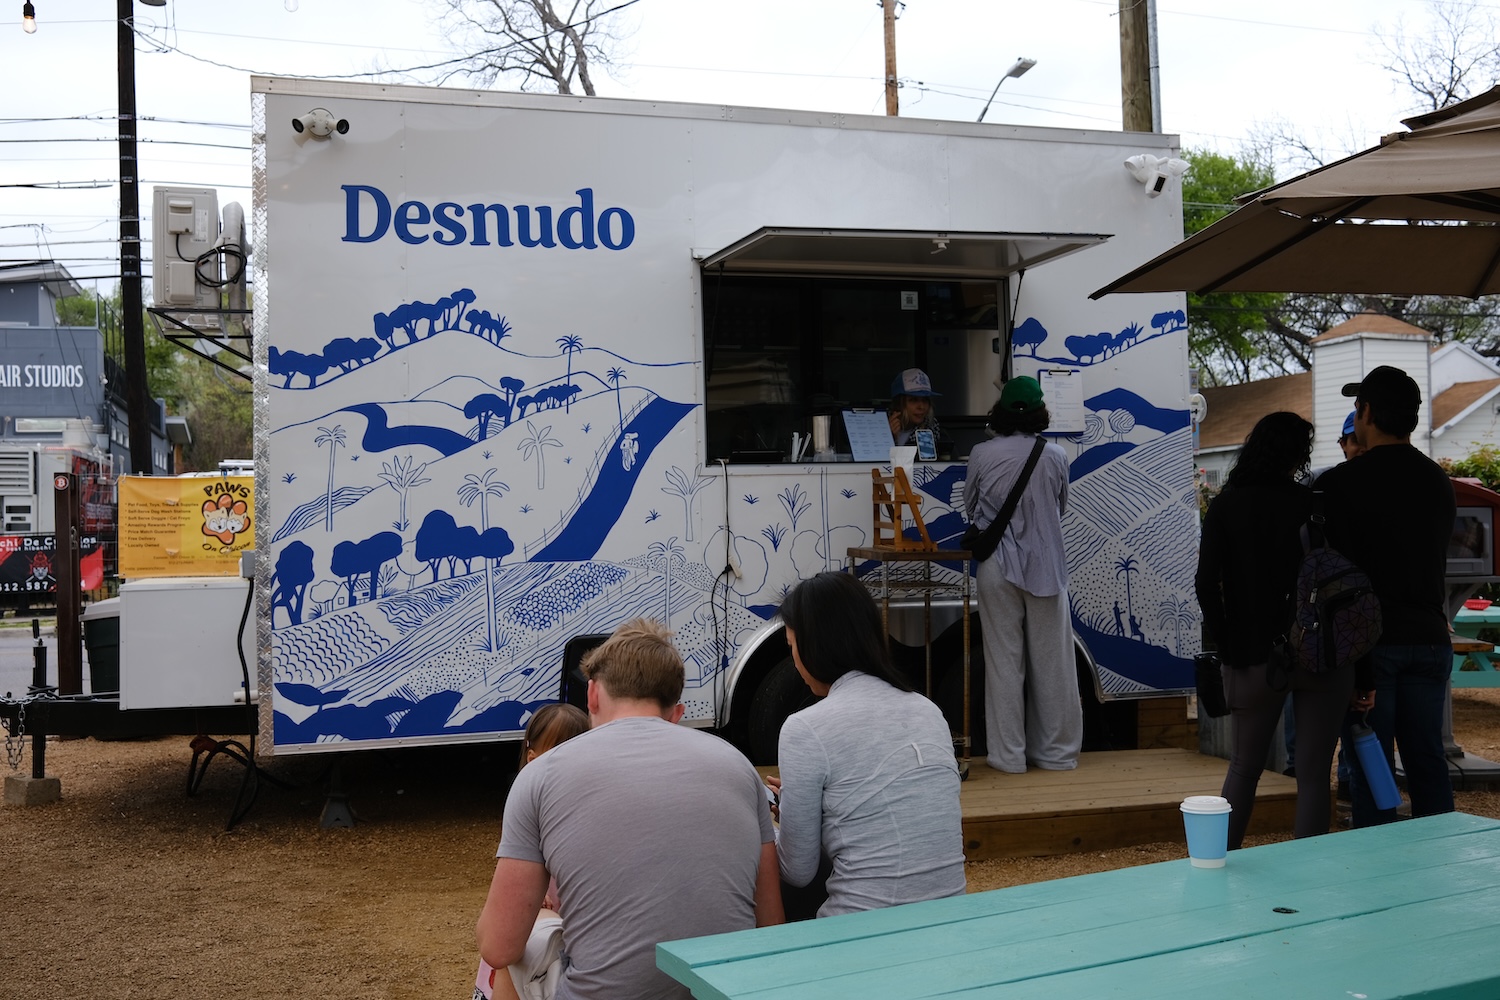 white food truck with blue design, people sitting outside, green bench